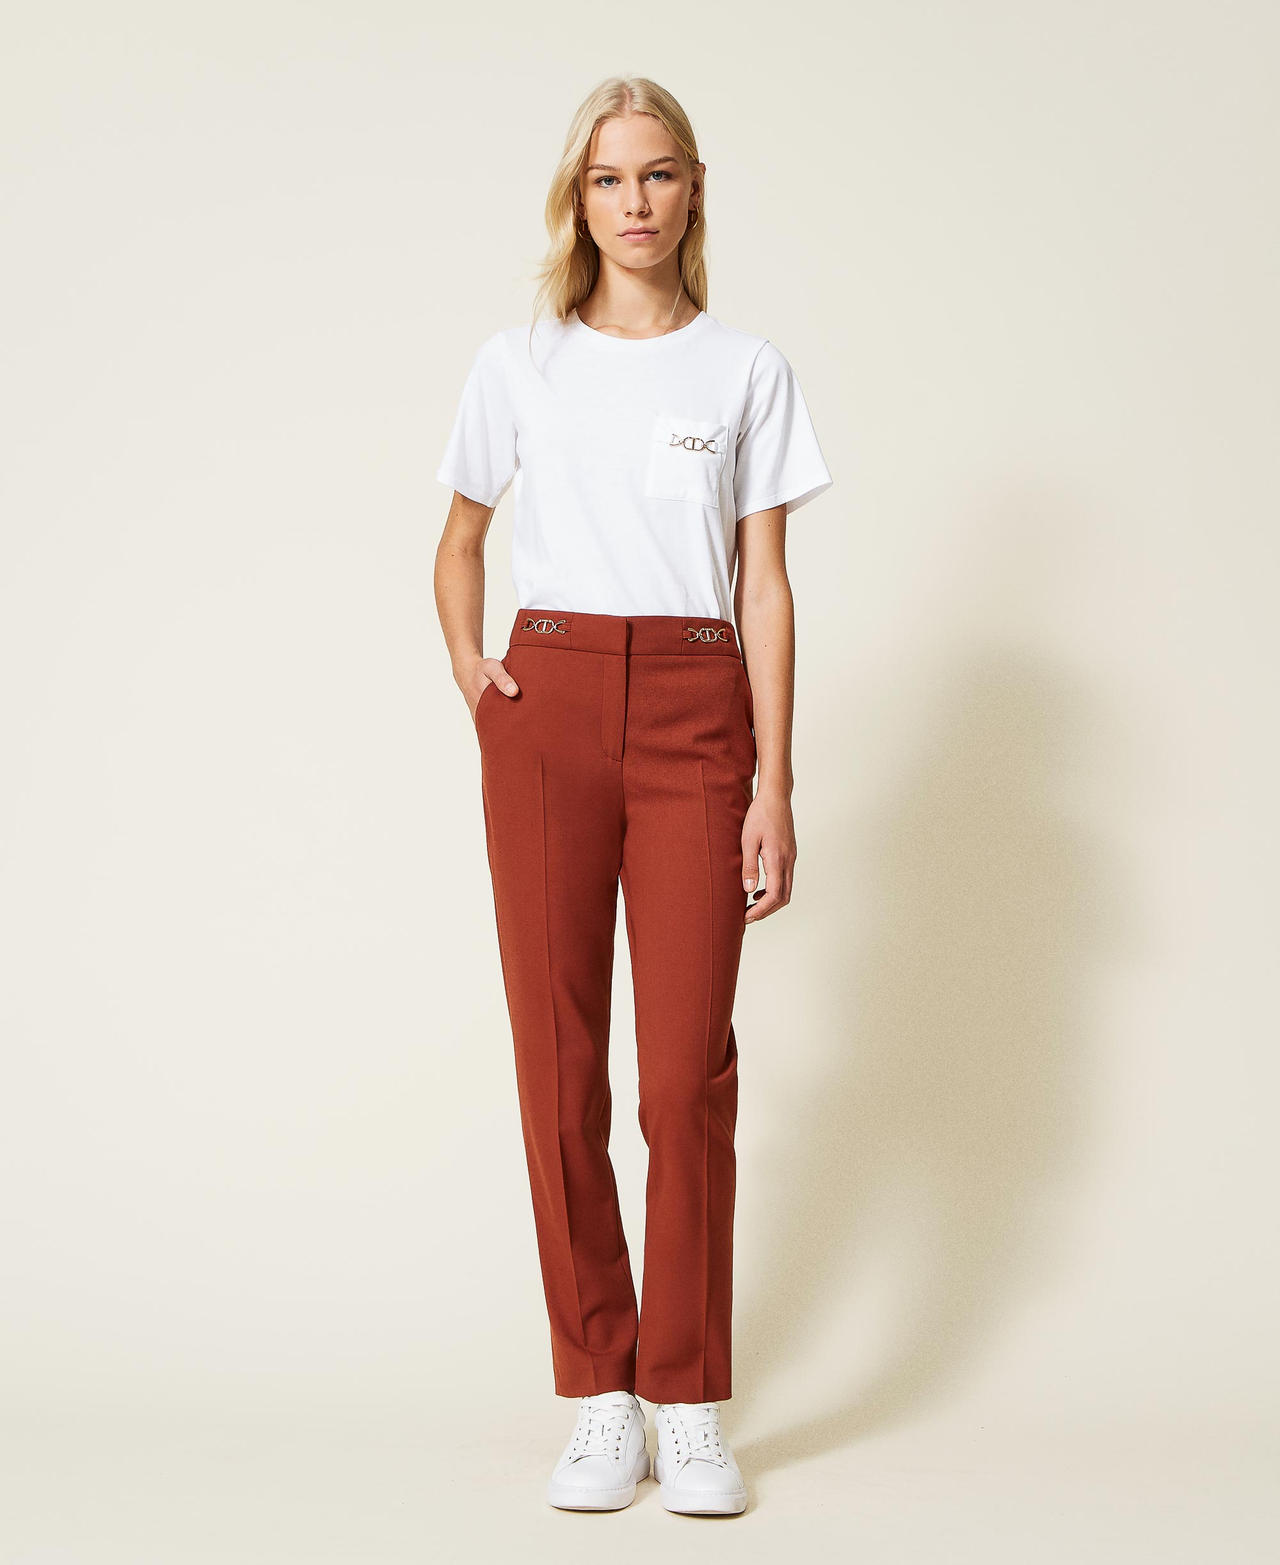 Wool blend twill trousers with clasps Black Woman 222TT2303-03